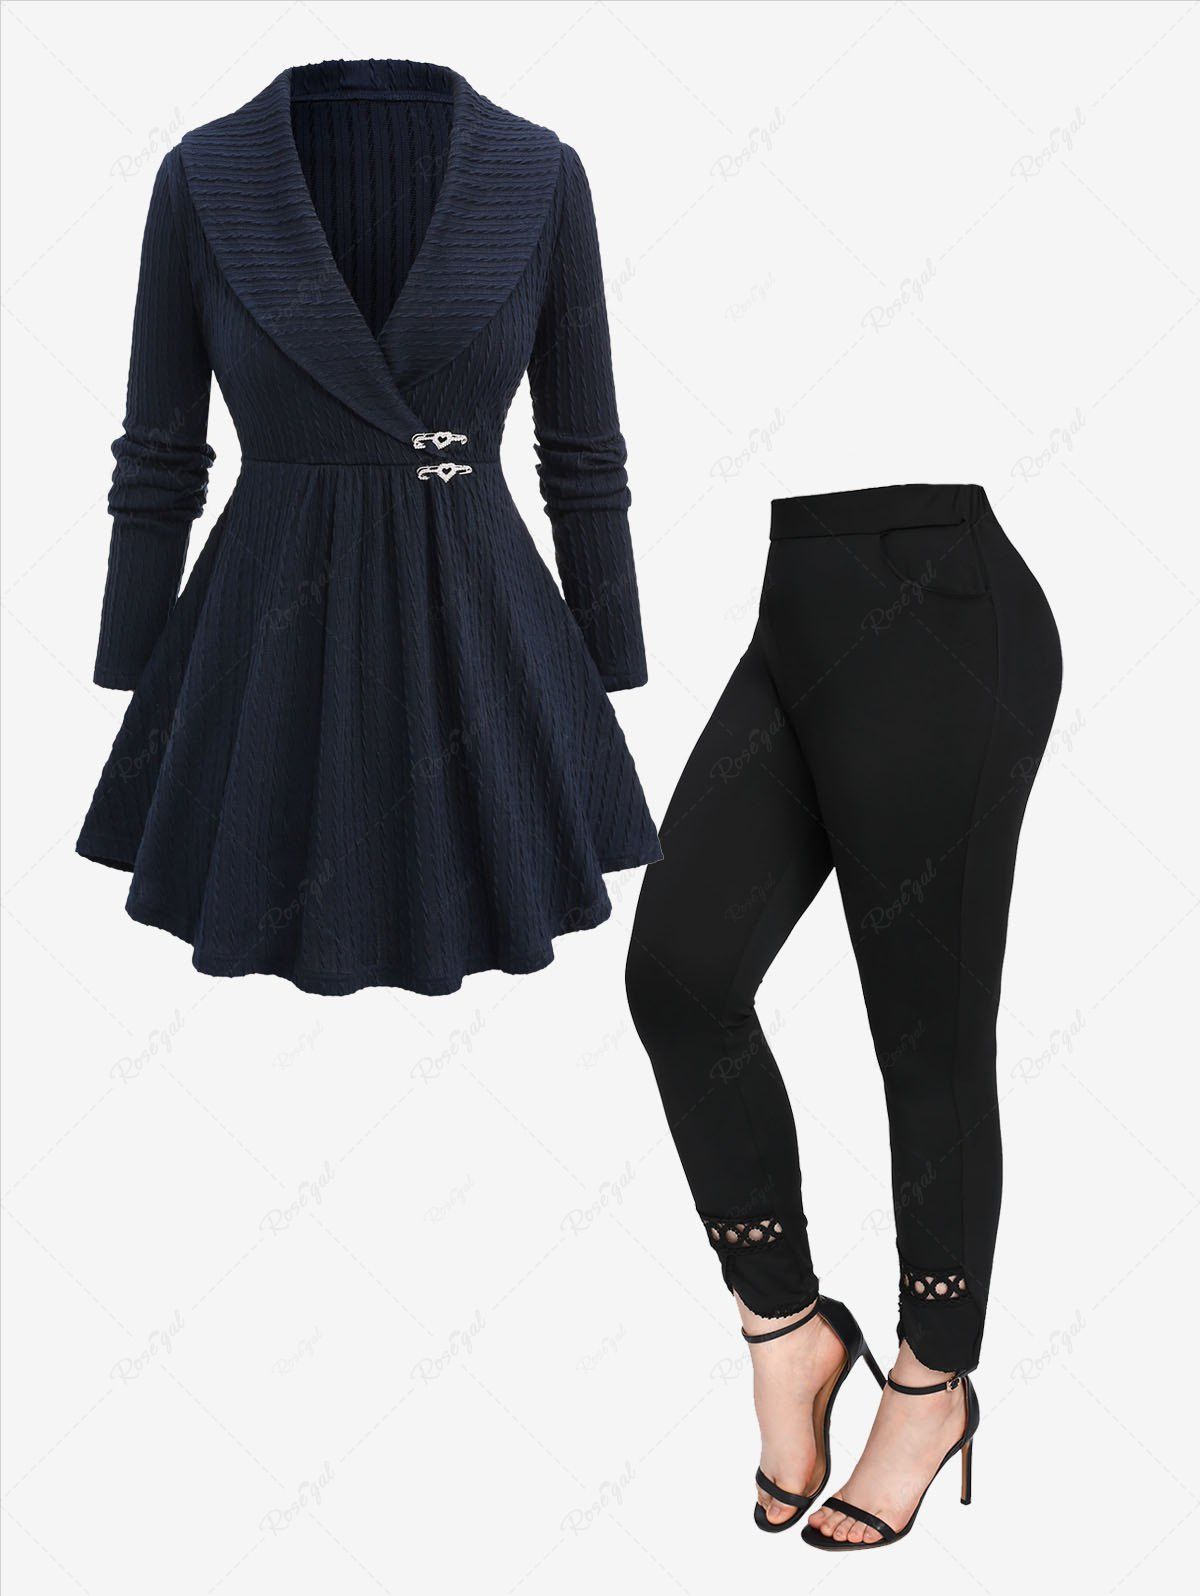 Affordable Heart Buckles Ruffles Surplice Cable Knit Sweater and Hollow Out Lace Trim Pockets Leggings Plus Size Outfit  